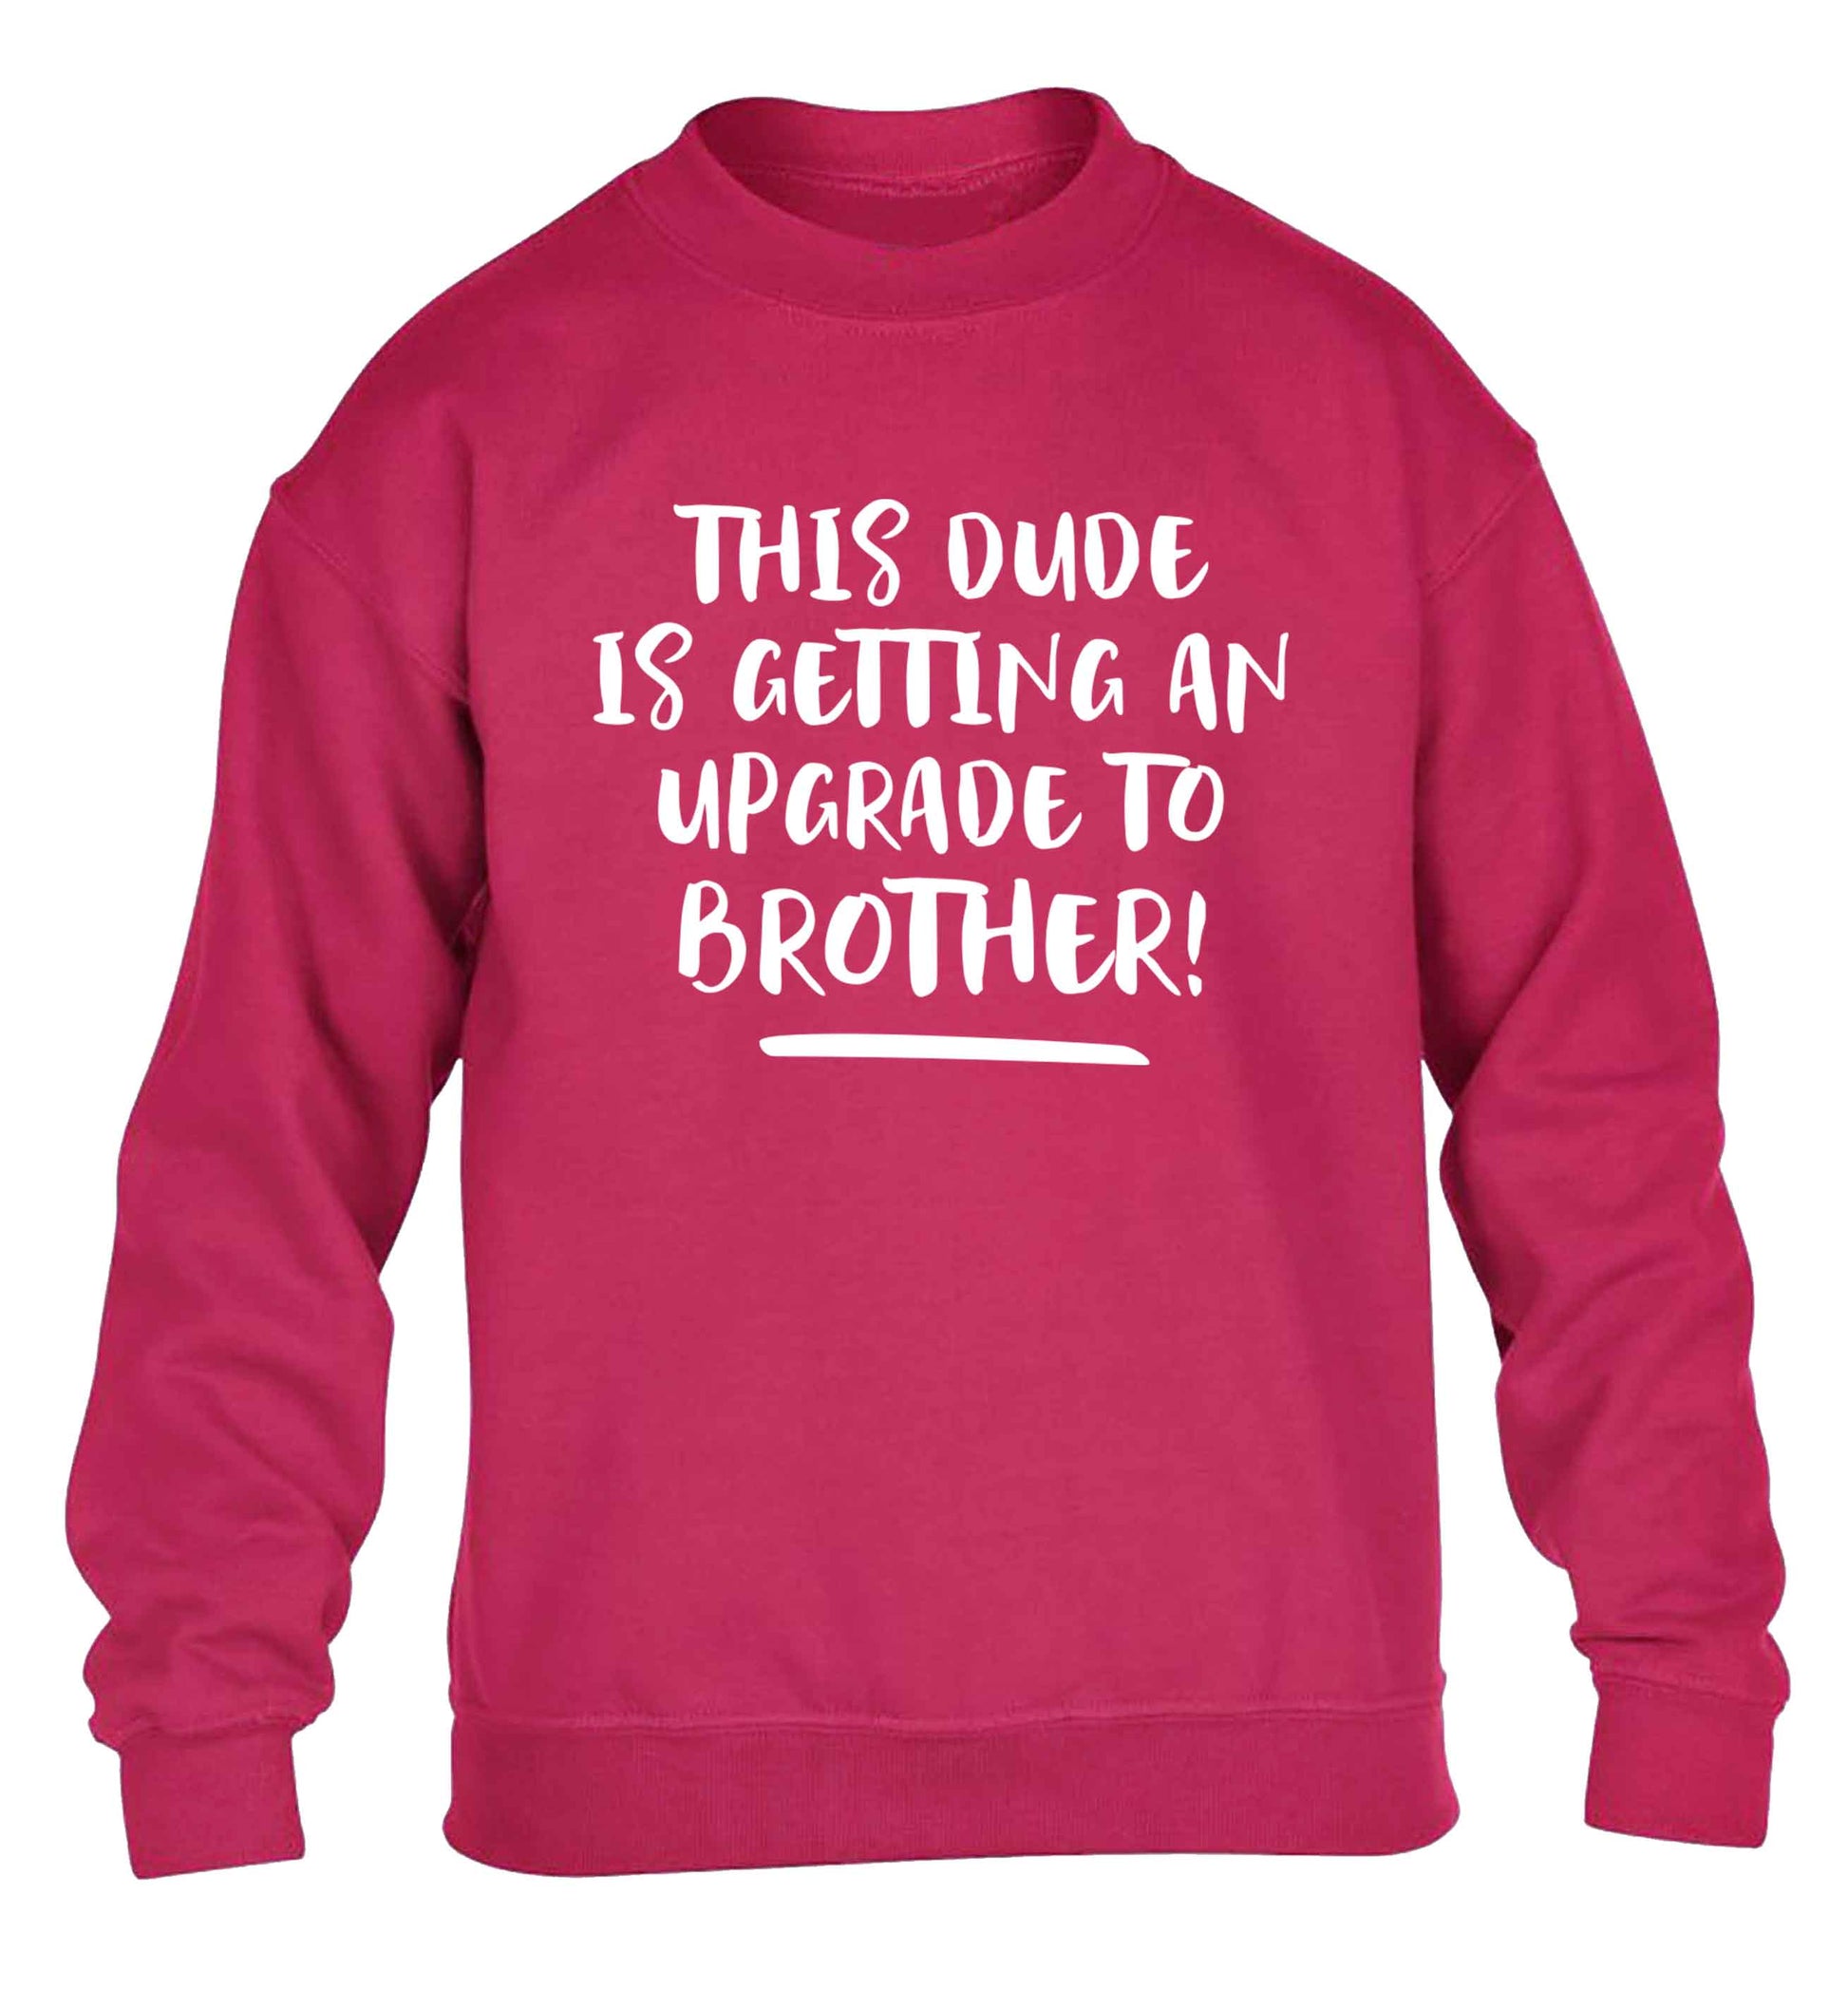 This dude is getting an upgrade to brother! children's pink sweater 12-13 Years